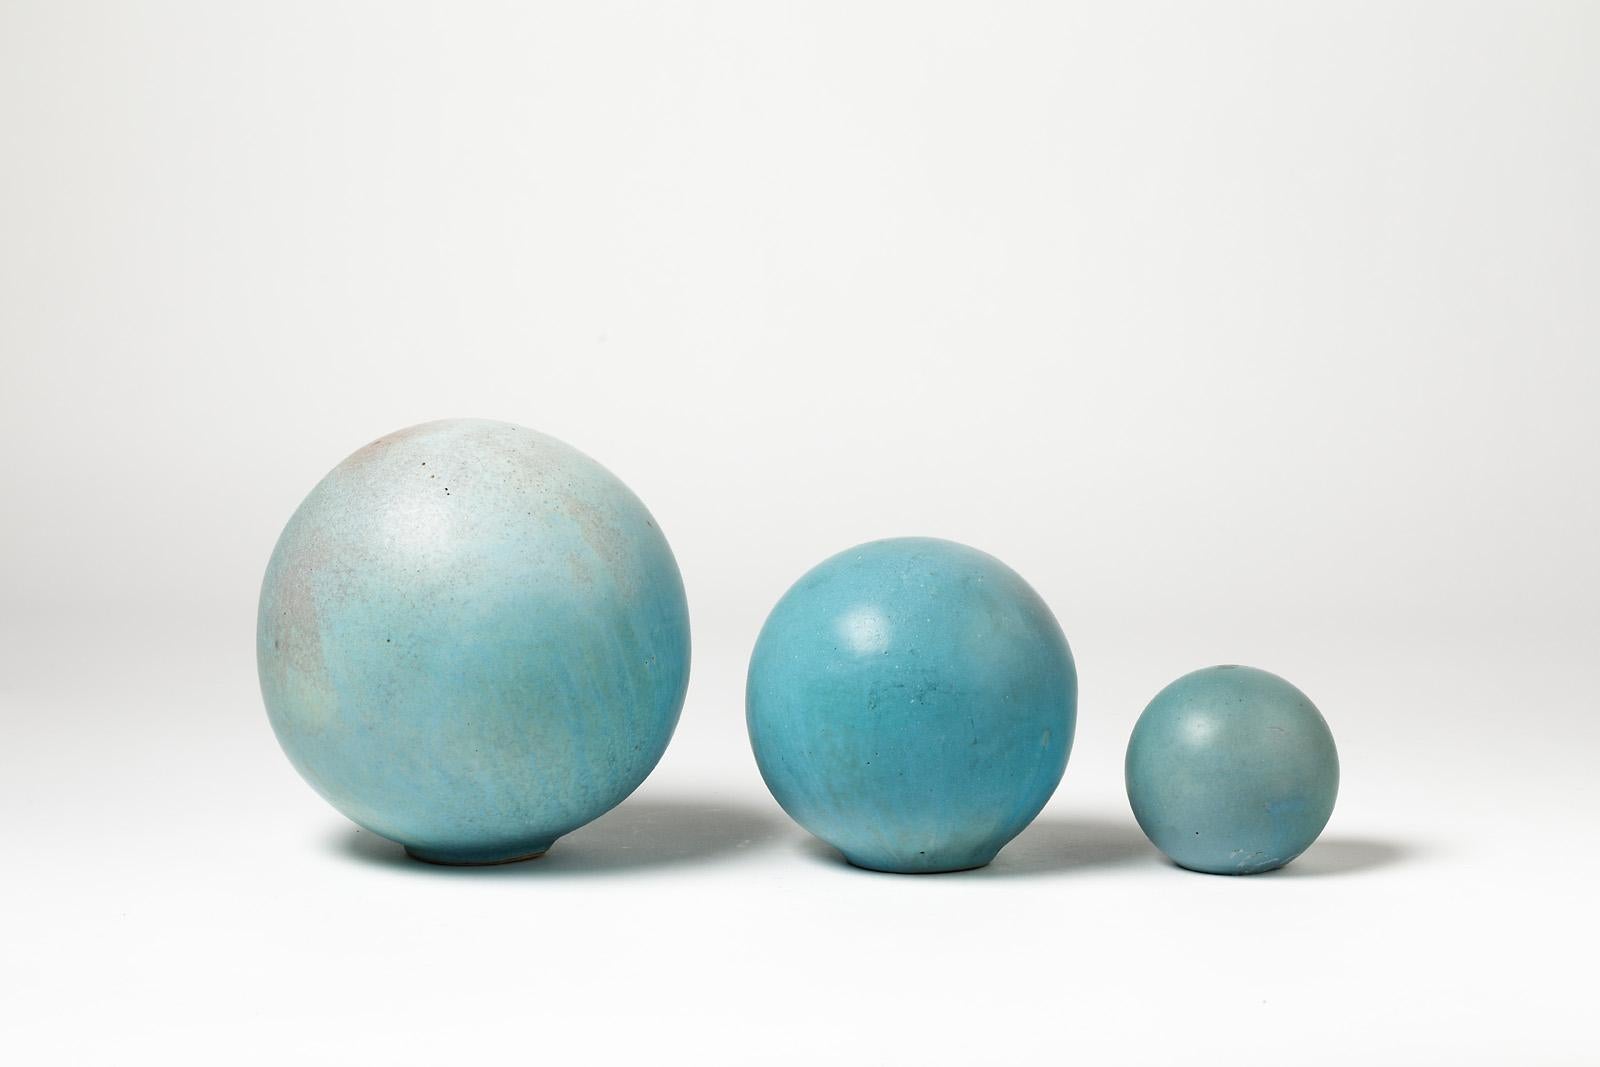 French Set of Three Ceramic Sculptures with Blue Glaze Decoration by Tim Orr, 1970